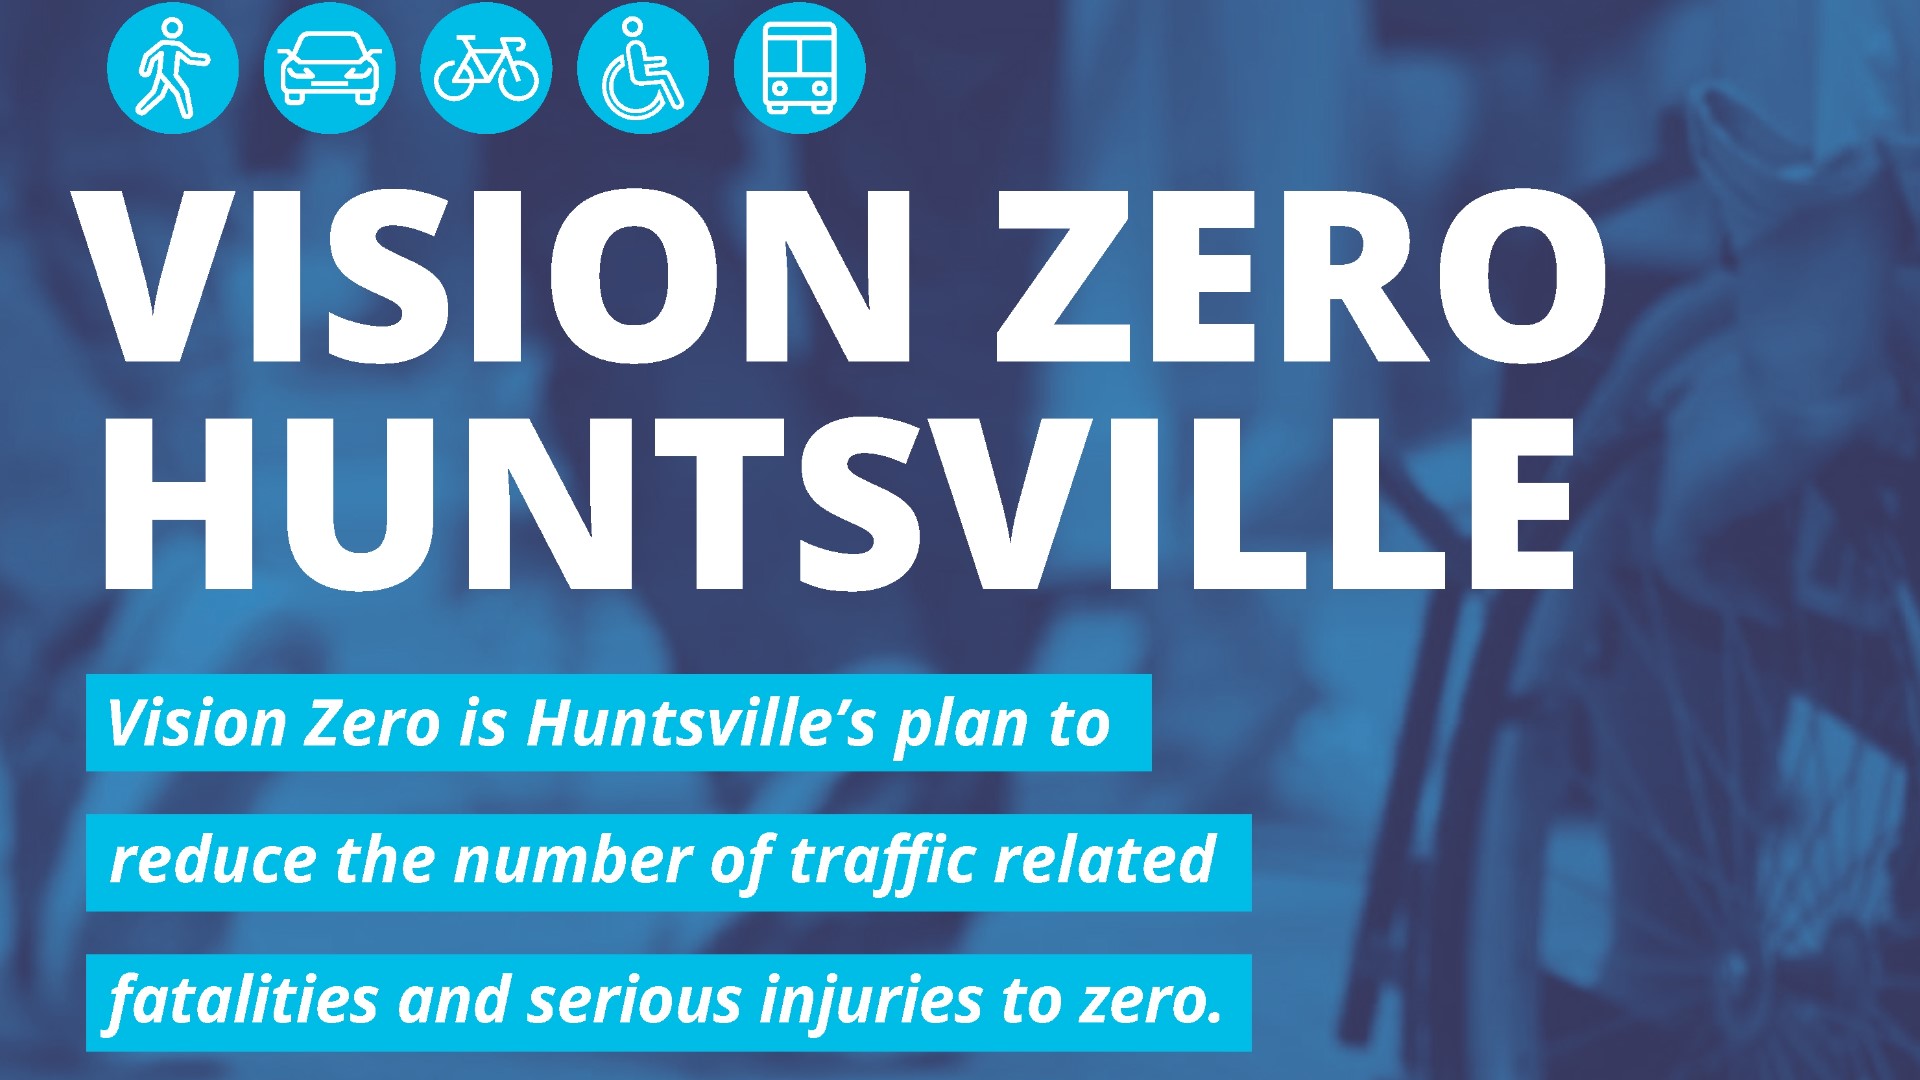 As Huntsville continues to grow, the likelihood of traffic related incidents increasing become more of a concern.